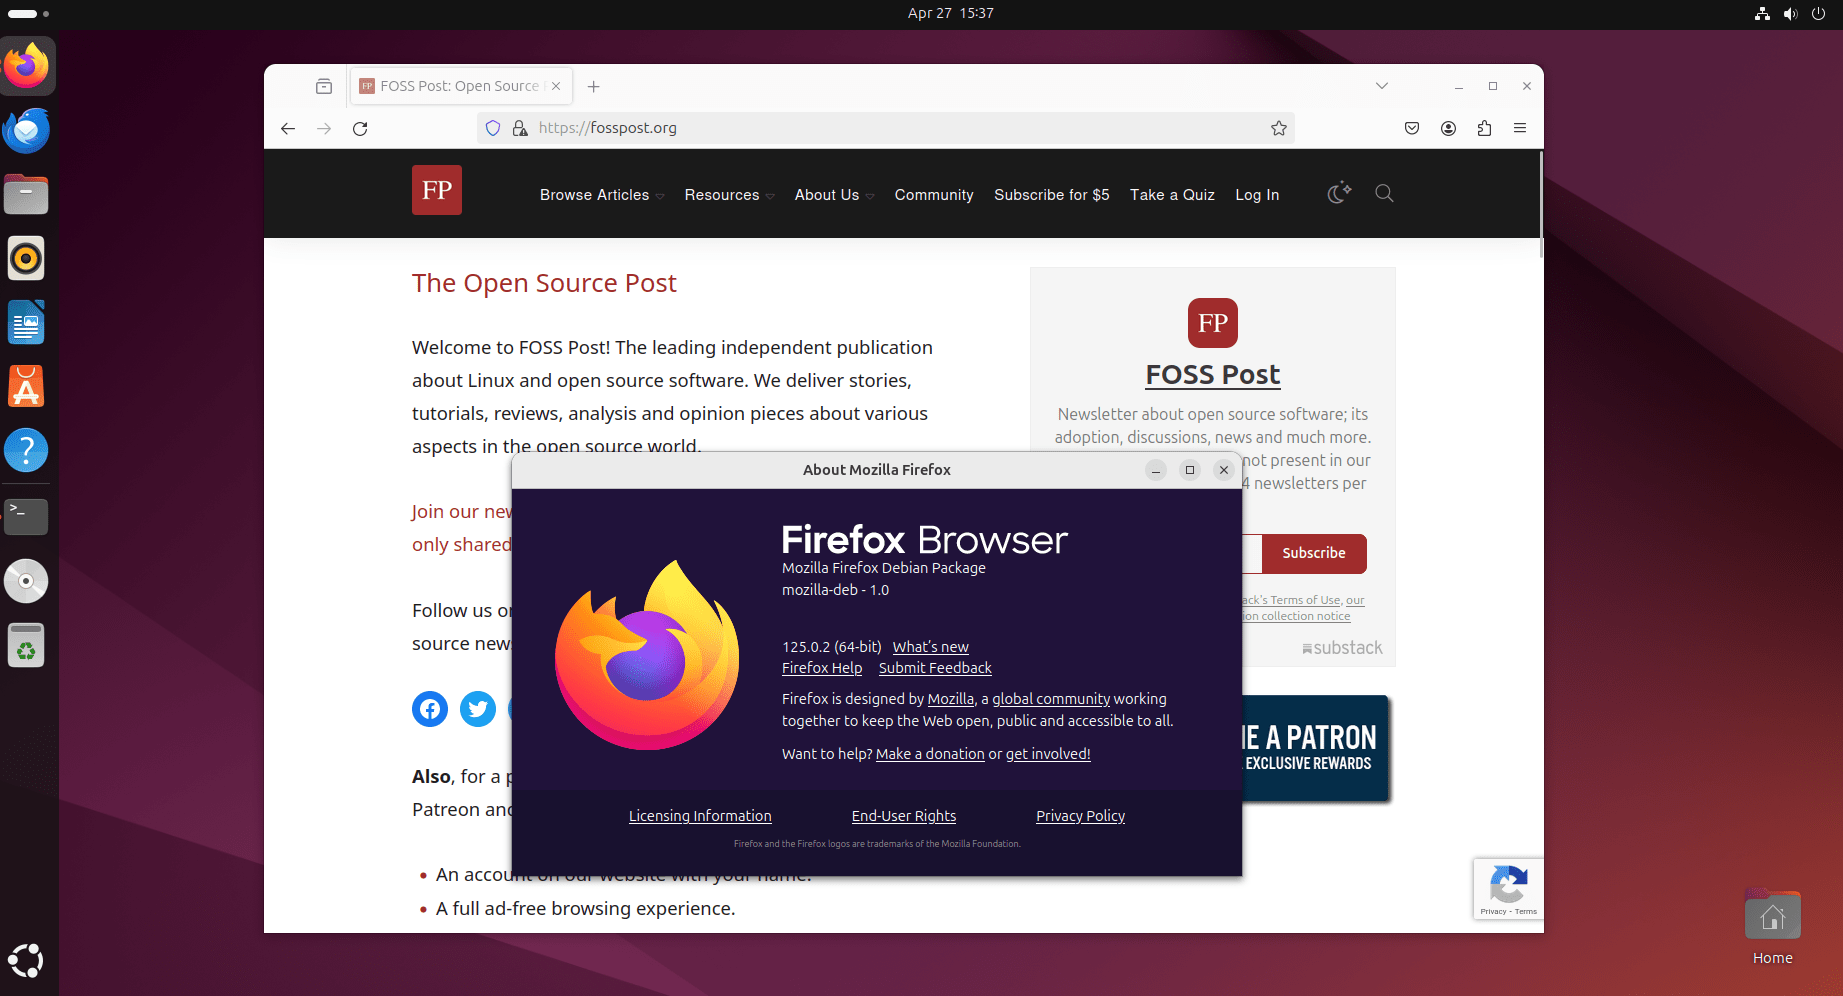 Install Firefox as a DEB Package on Ubuntu instead of Snap